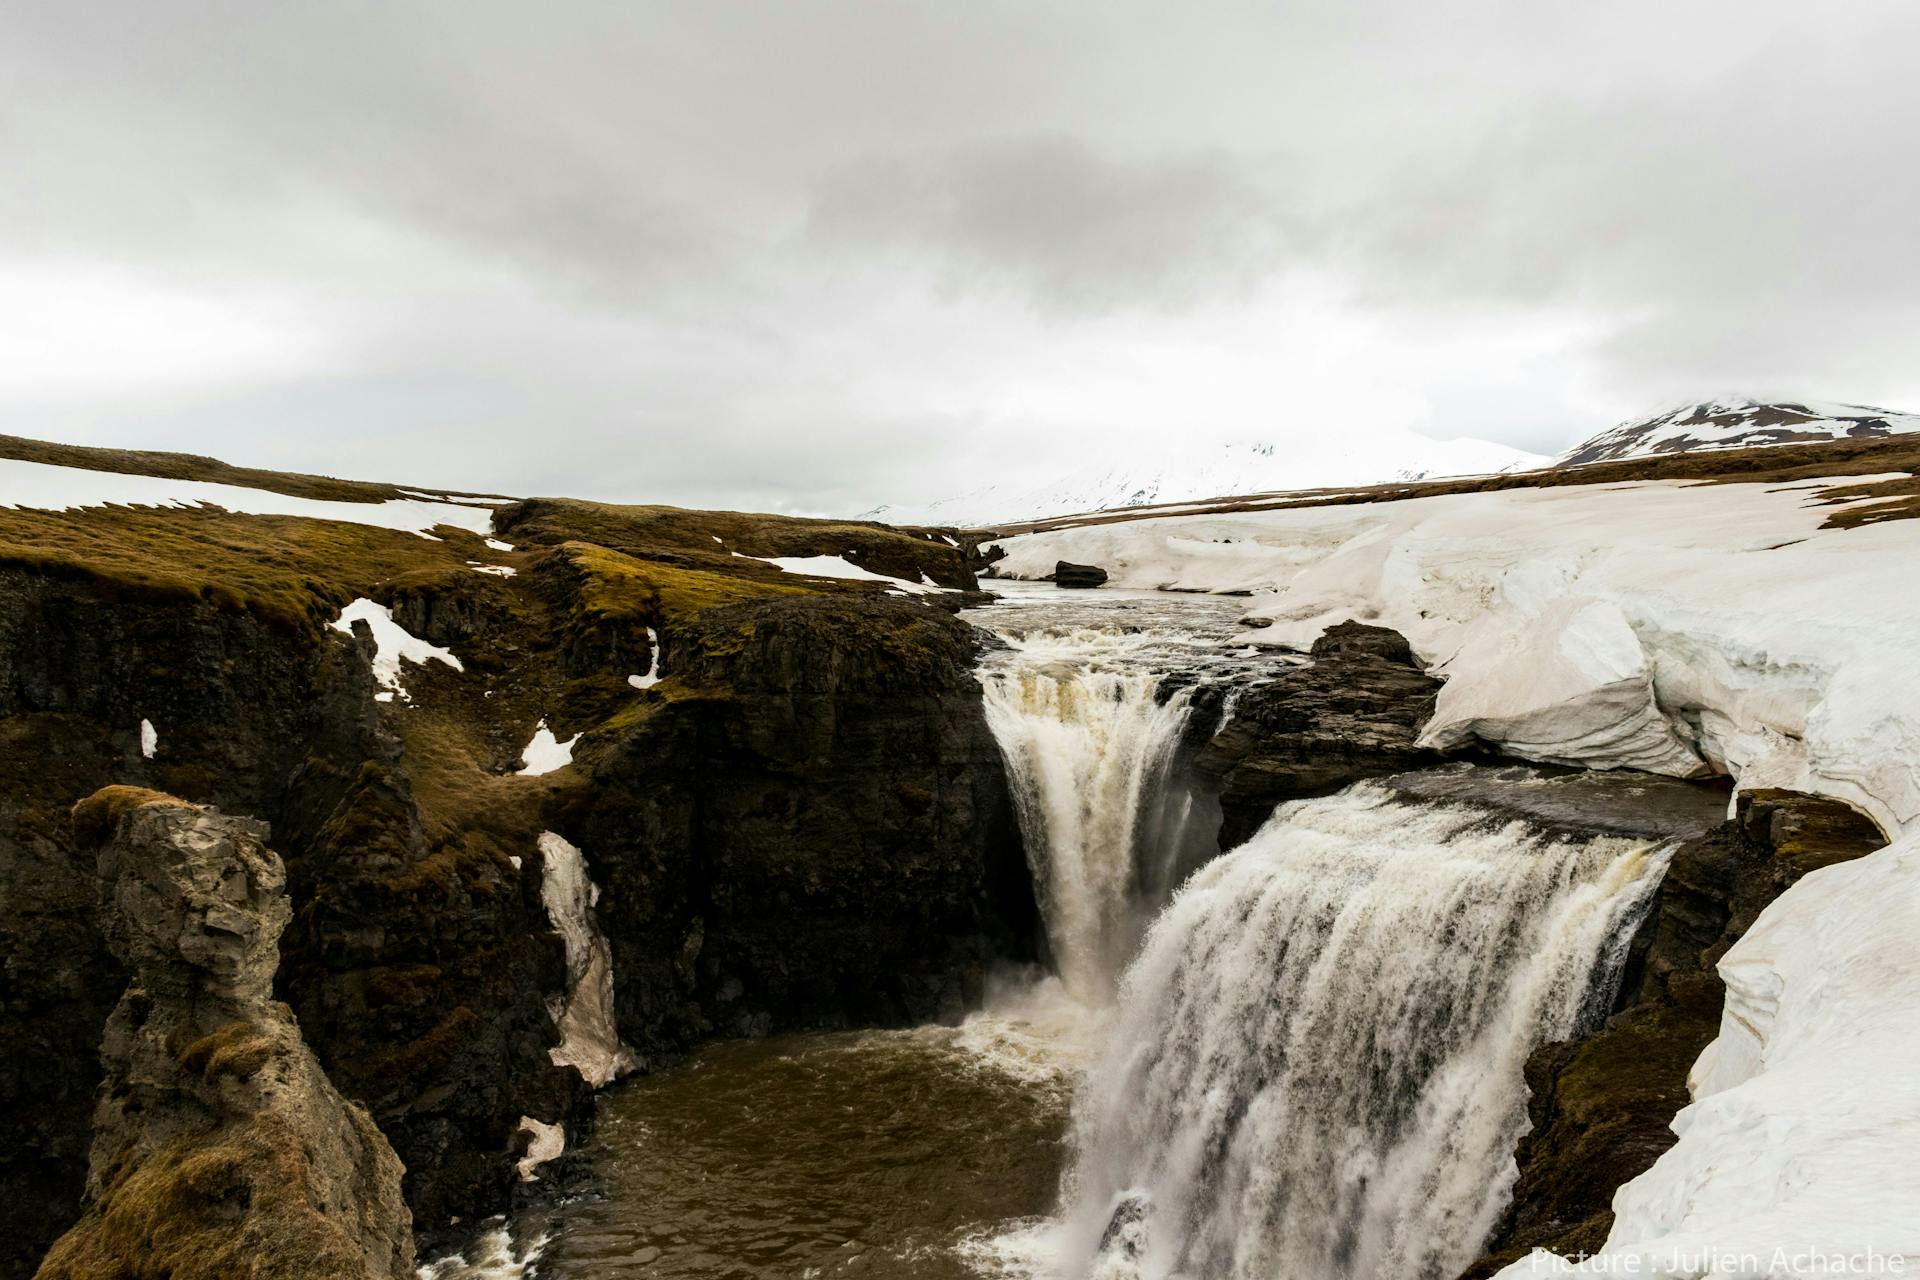 Snow and waterfall - Laugarfell, east iceland